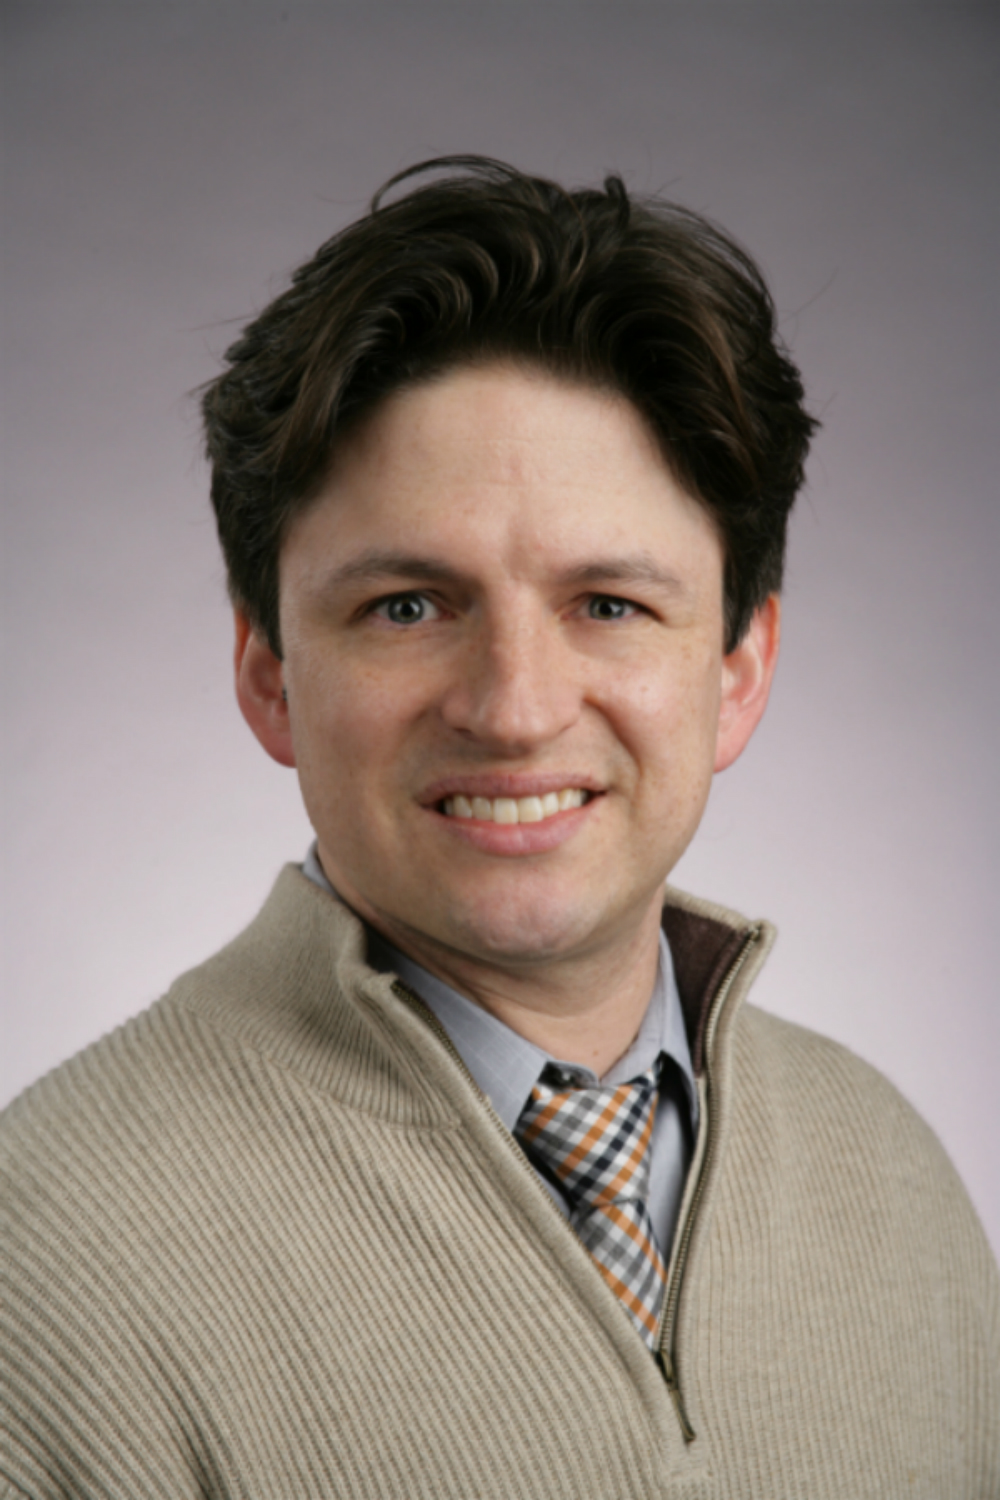 Brian Trease, PhD - Assistant Professor, College of Engineering